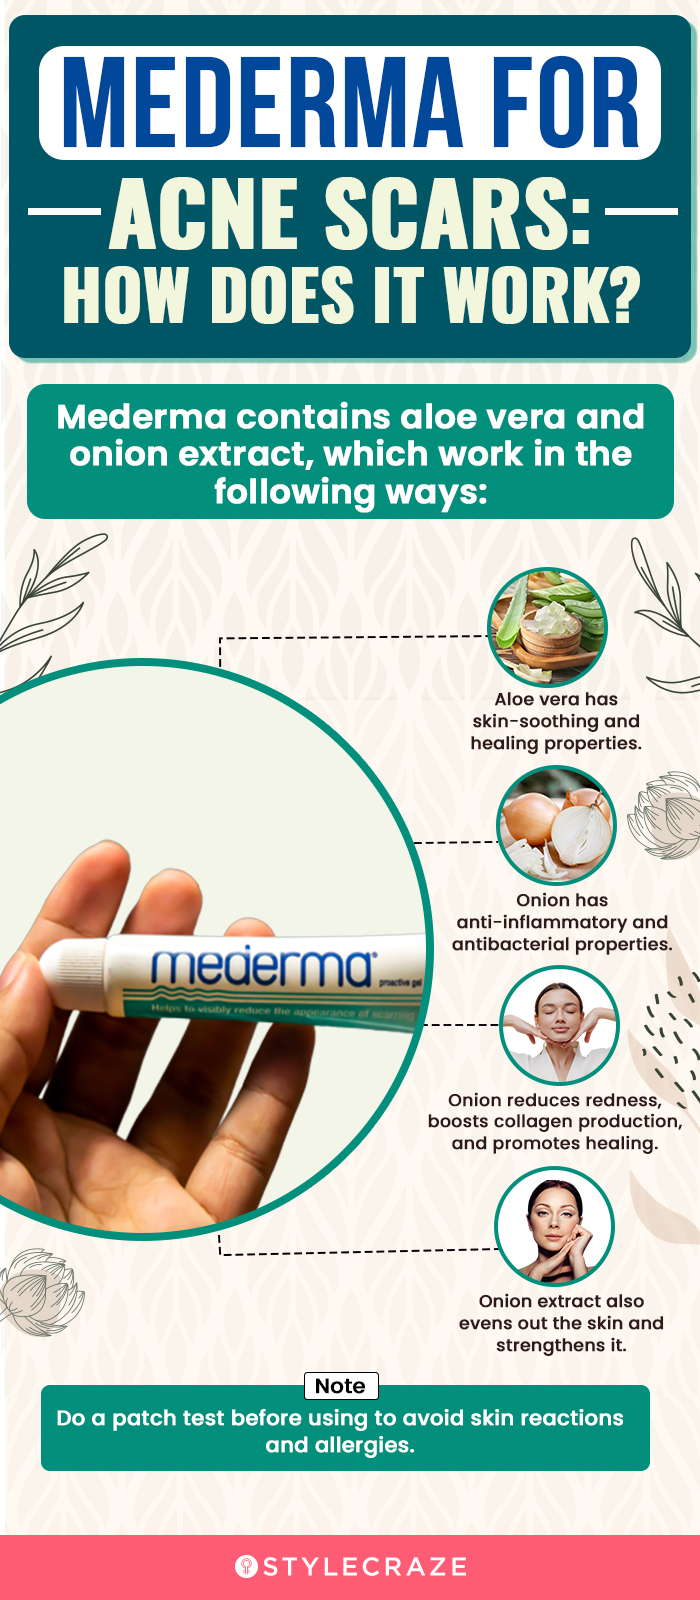 Mederma For Acne Scars: How Does It Work (infographic)